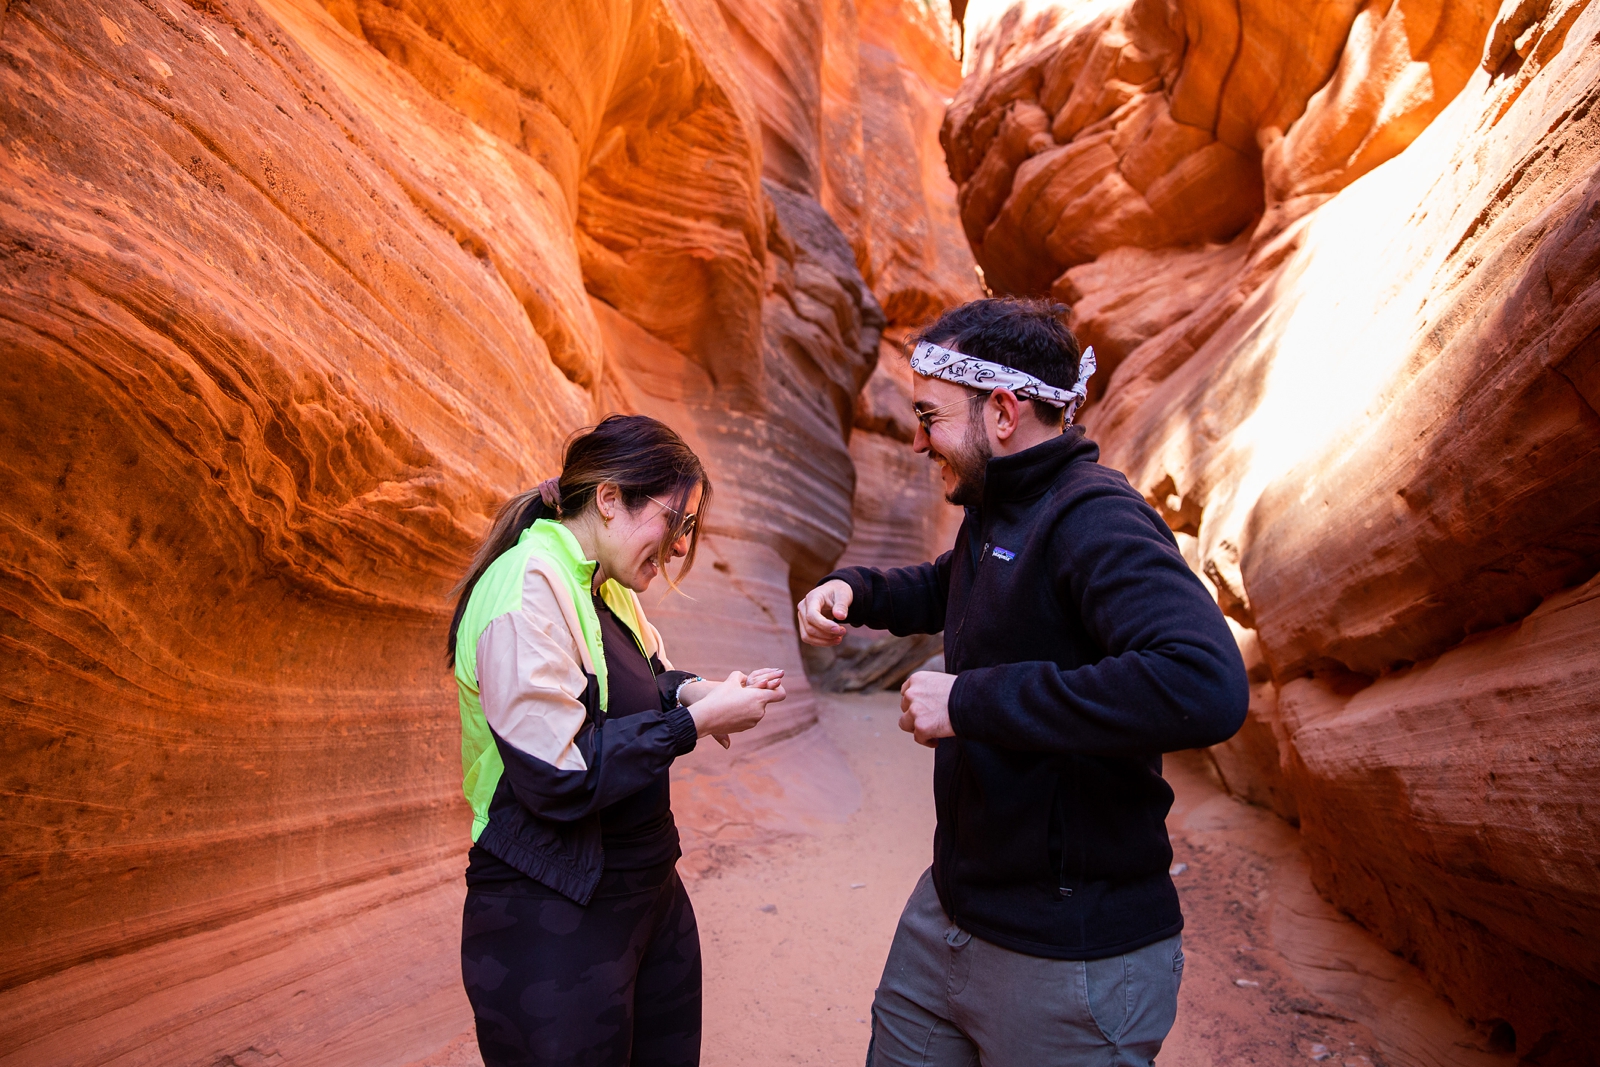 A newly engaged couple looking at each other and the girl is looking at her new ring with a big smile on her face in the Utah slot canyon